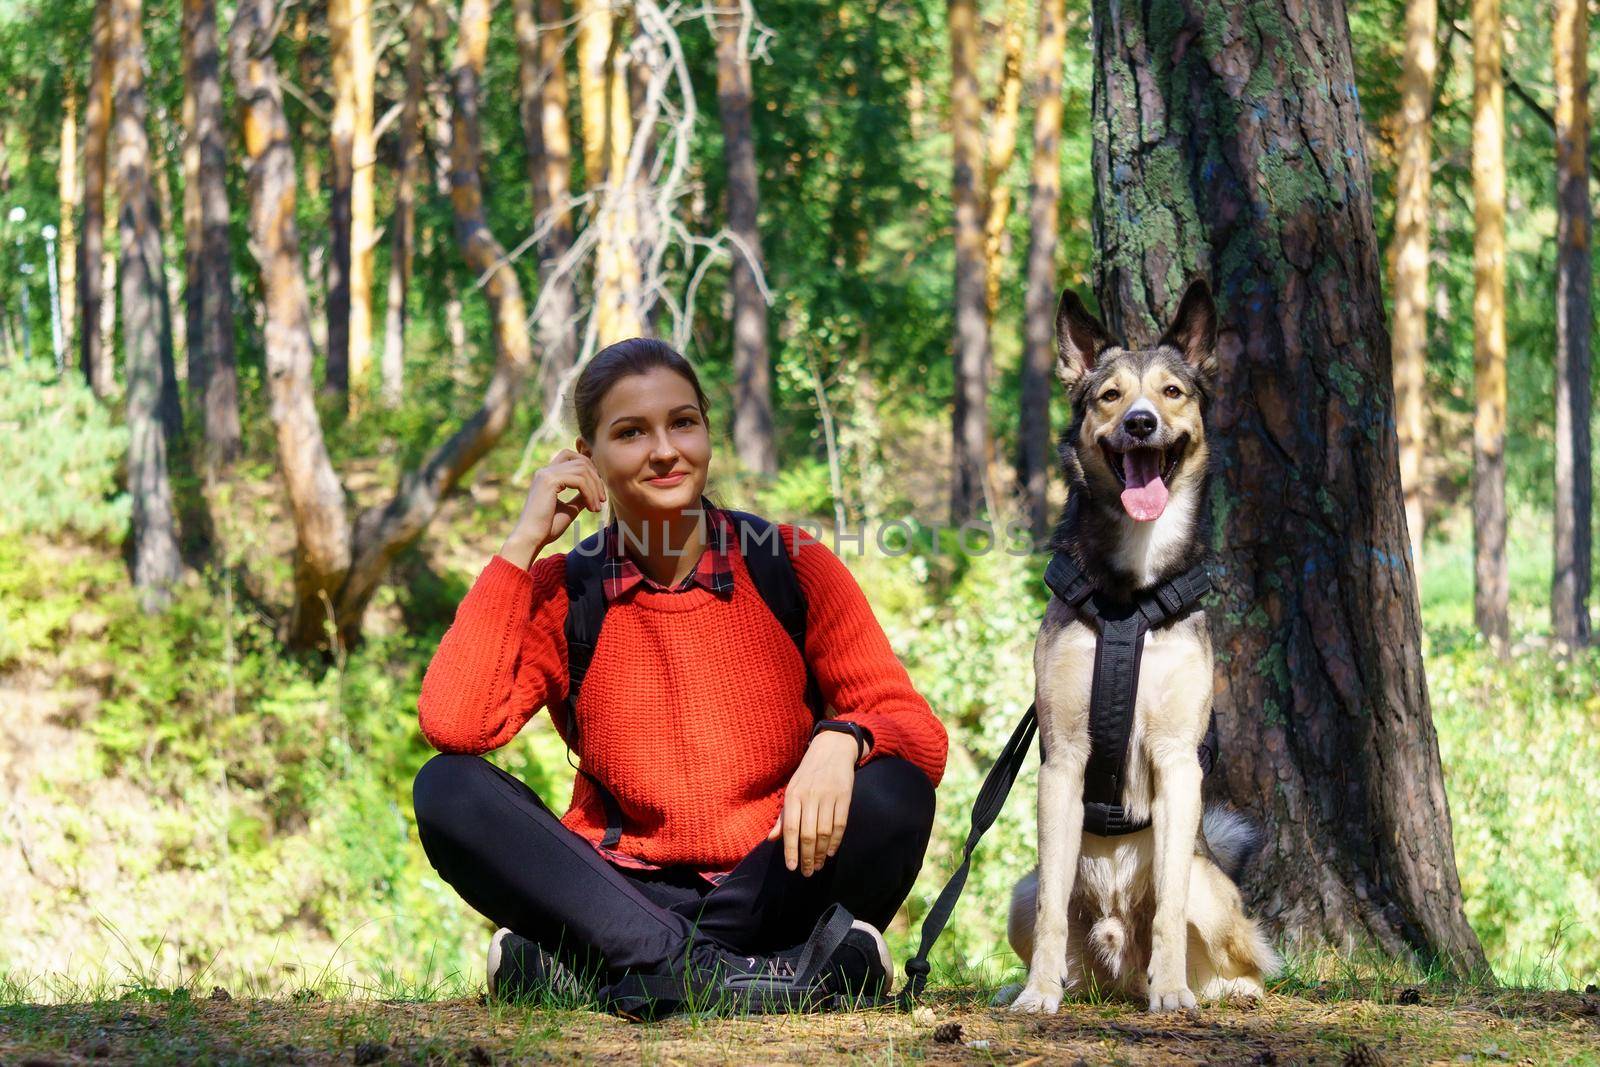 A young girl in a red jacket is sitting in the forest with her dog during a walk by darksoul72